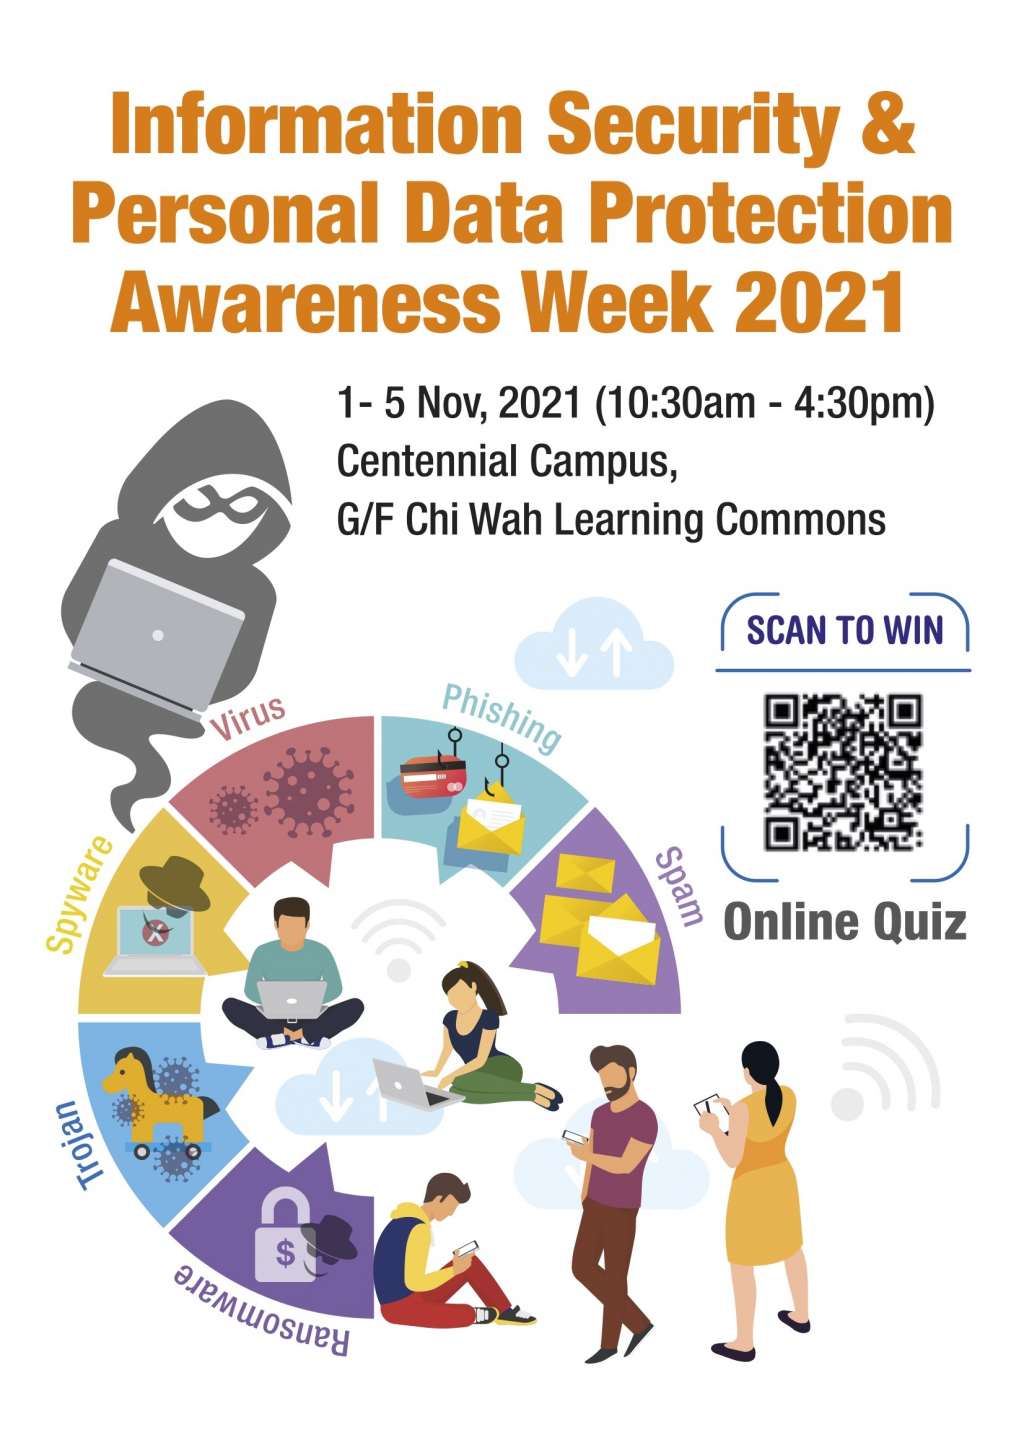 Information Security & Personal Data Protection Awareness Week 2021